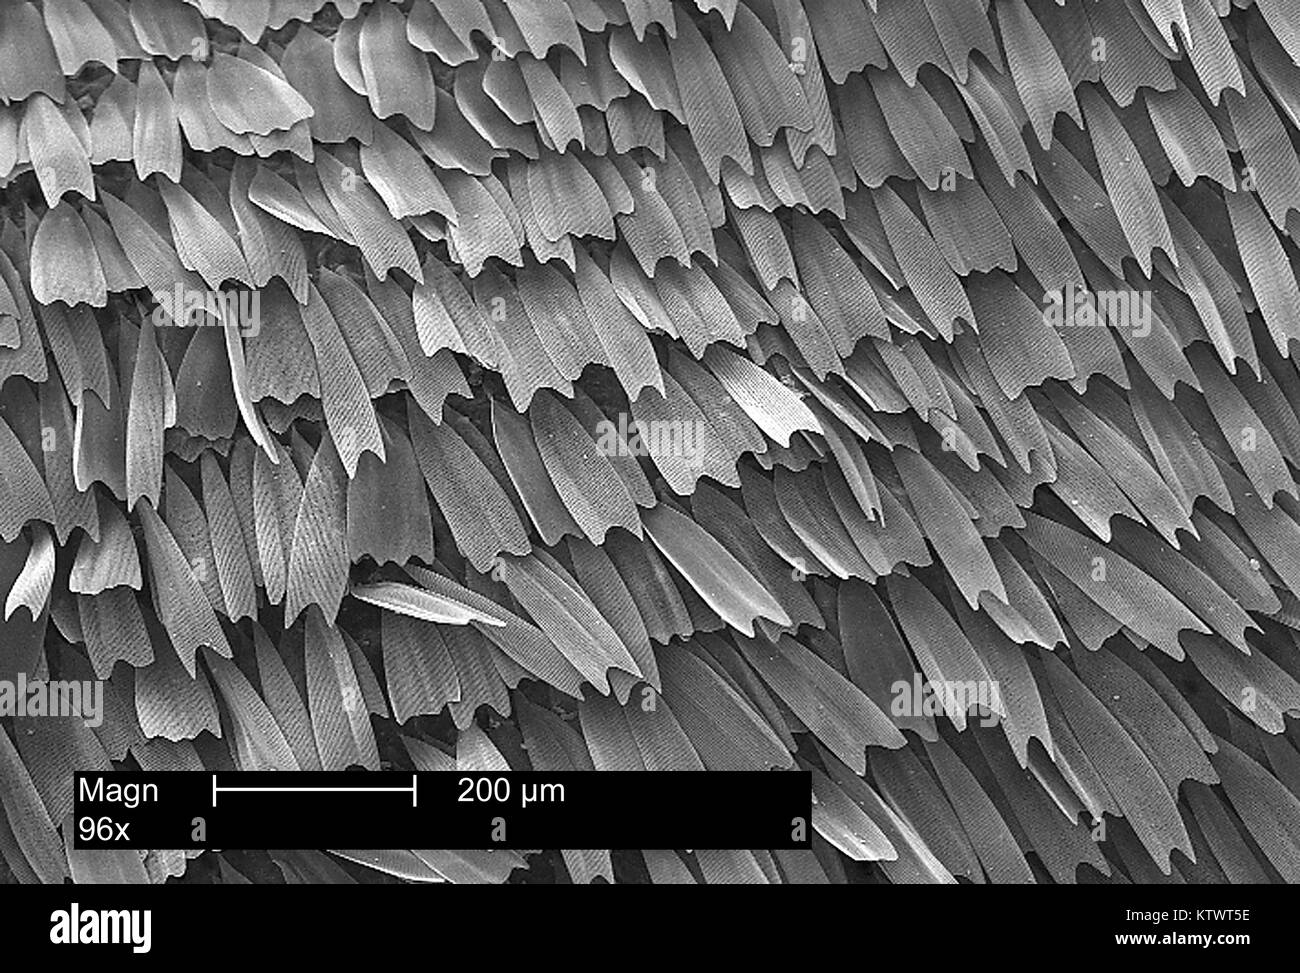 Scalar patterning of a butterfly's wing magnified 96X. Note the shingle-like pattern of the wing, which promotes heightened aerodynamic lift during the insect's flight. Image courtesy CDC, 2002. Stock Photo